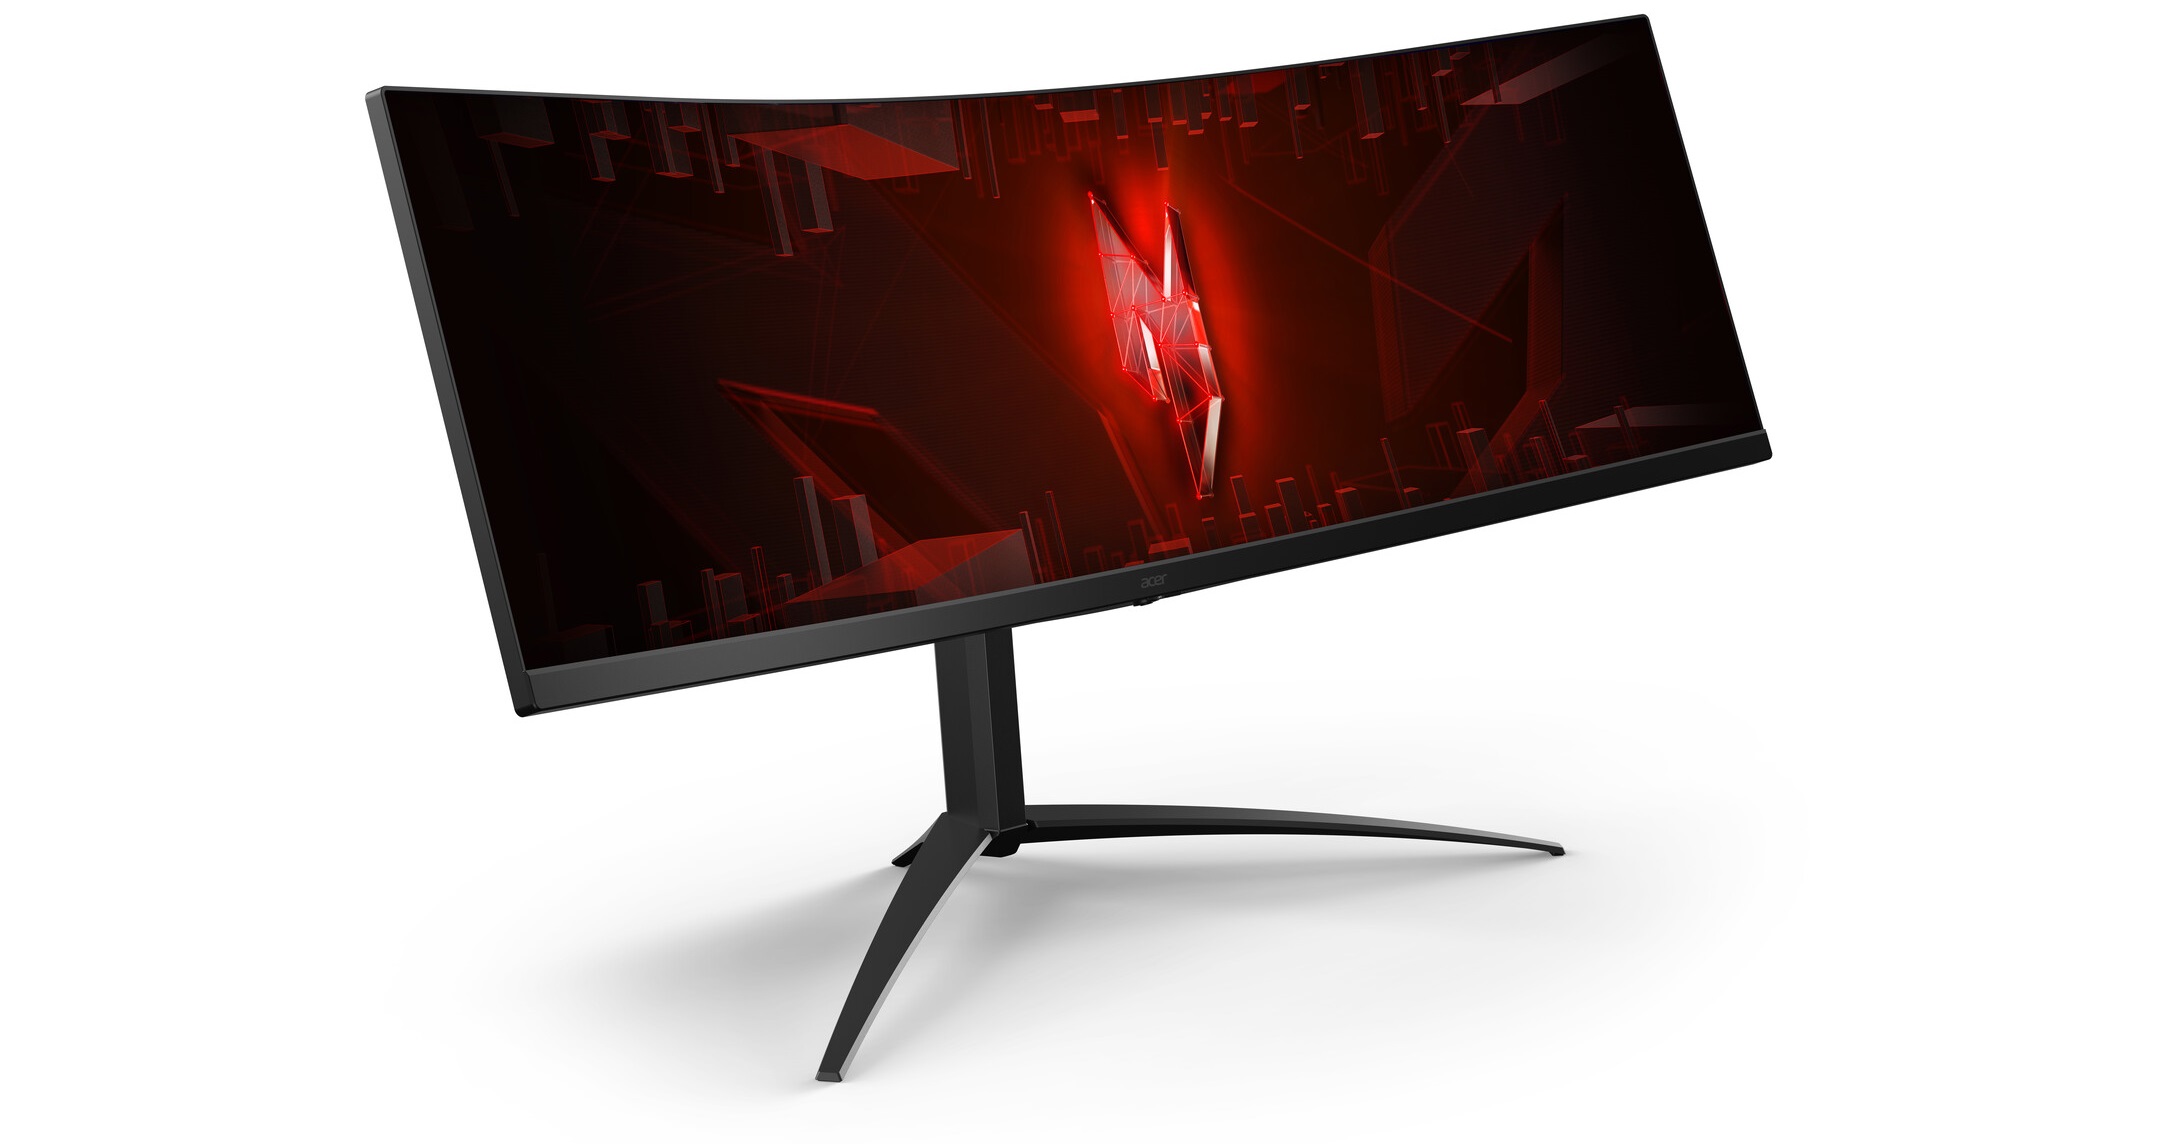 Acer launches Nitro XZ452CU V 5K monitor with 165Hz frame rate for €1099